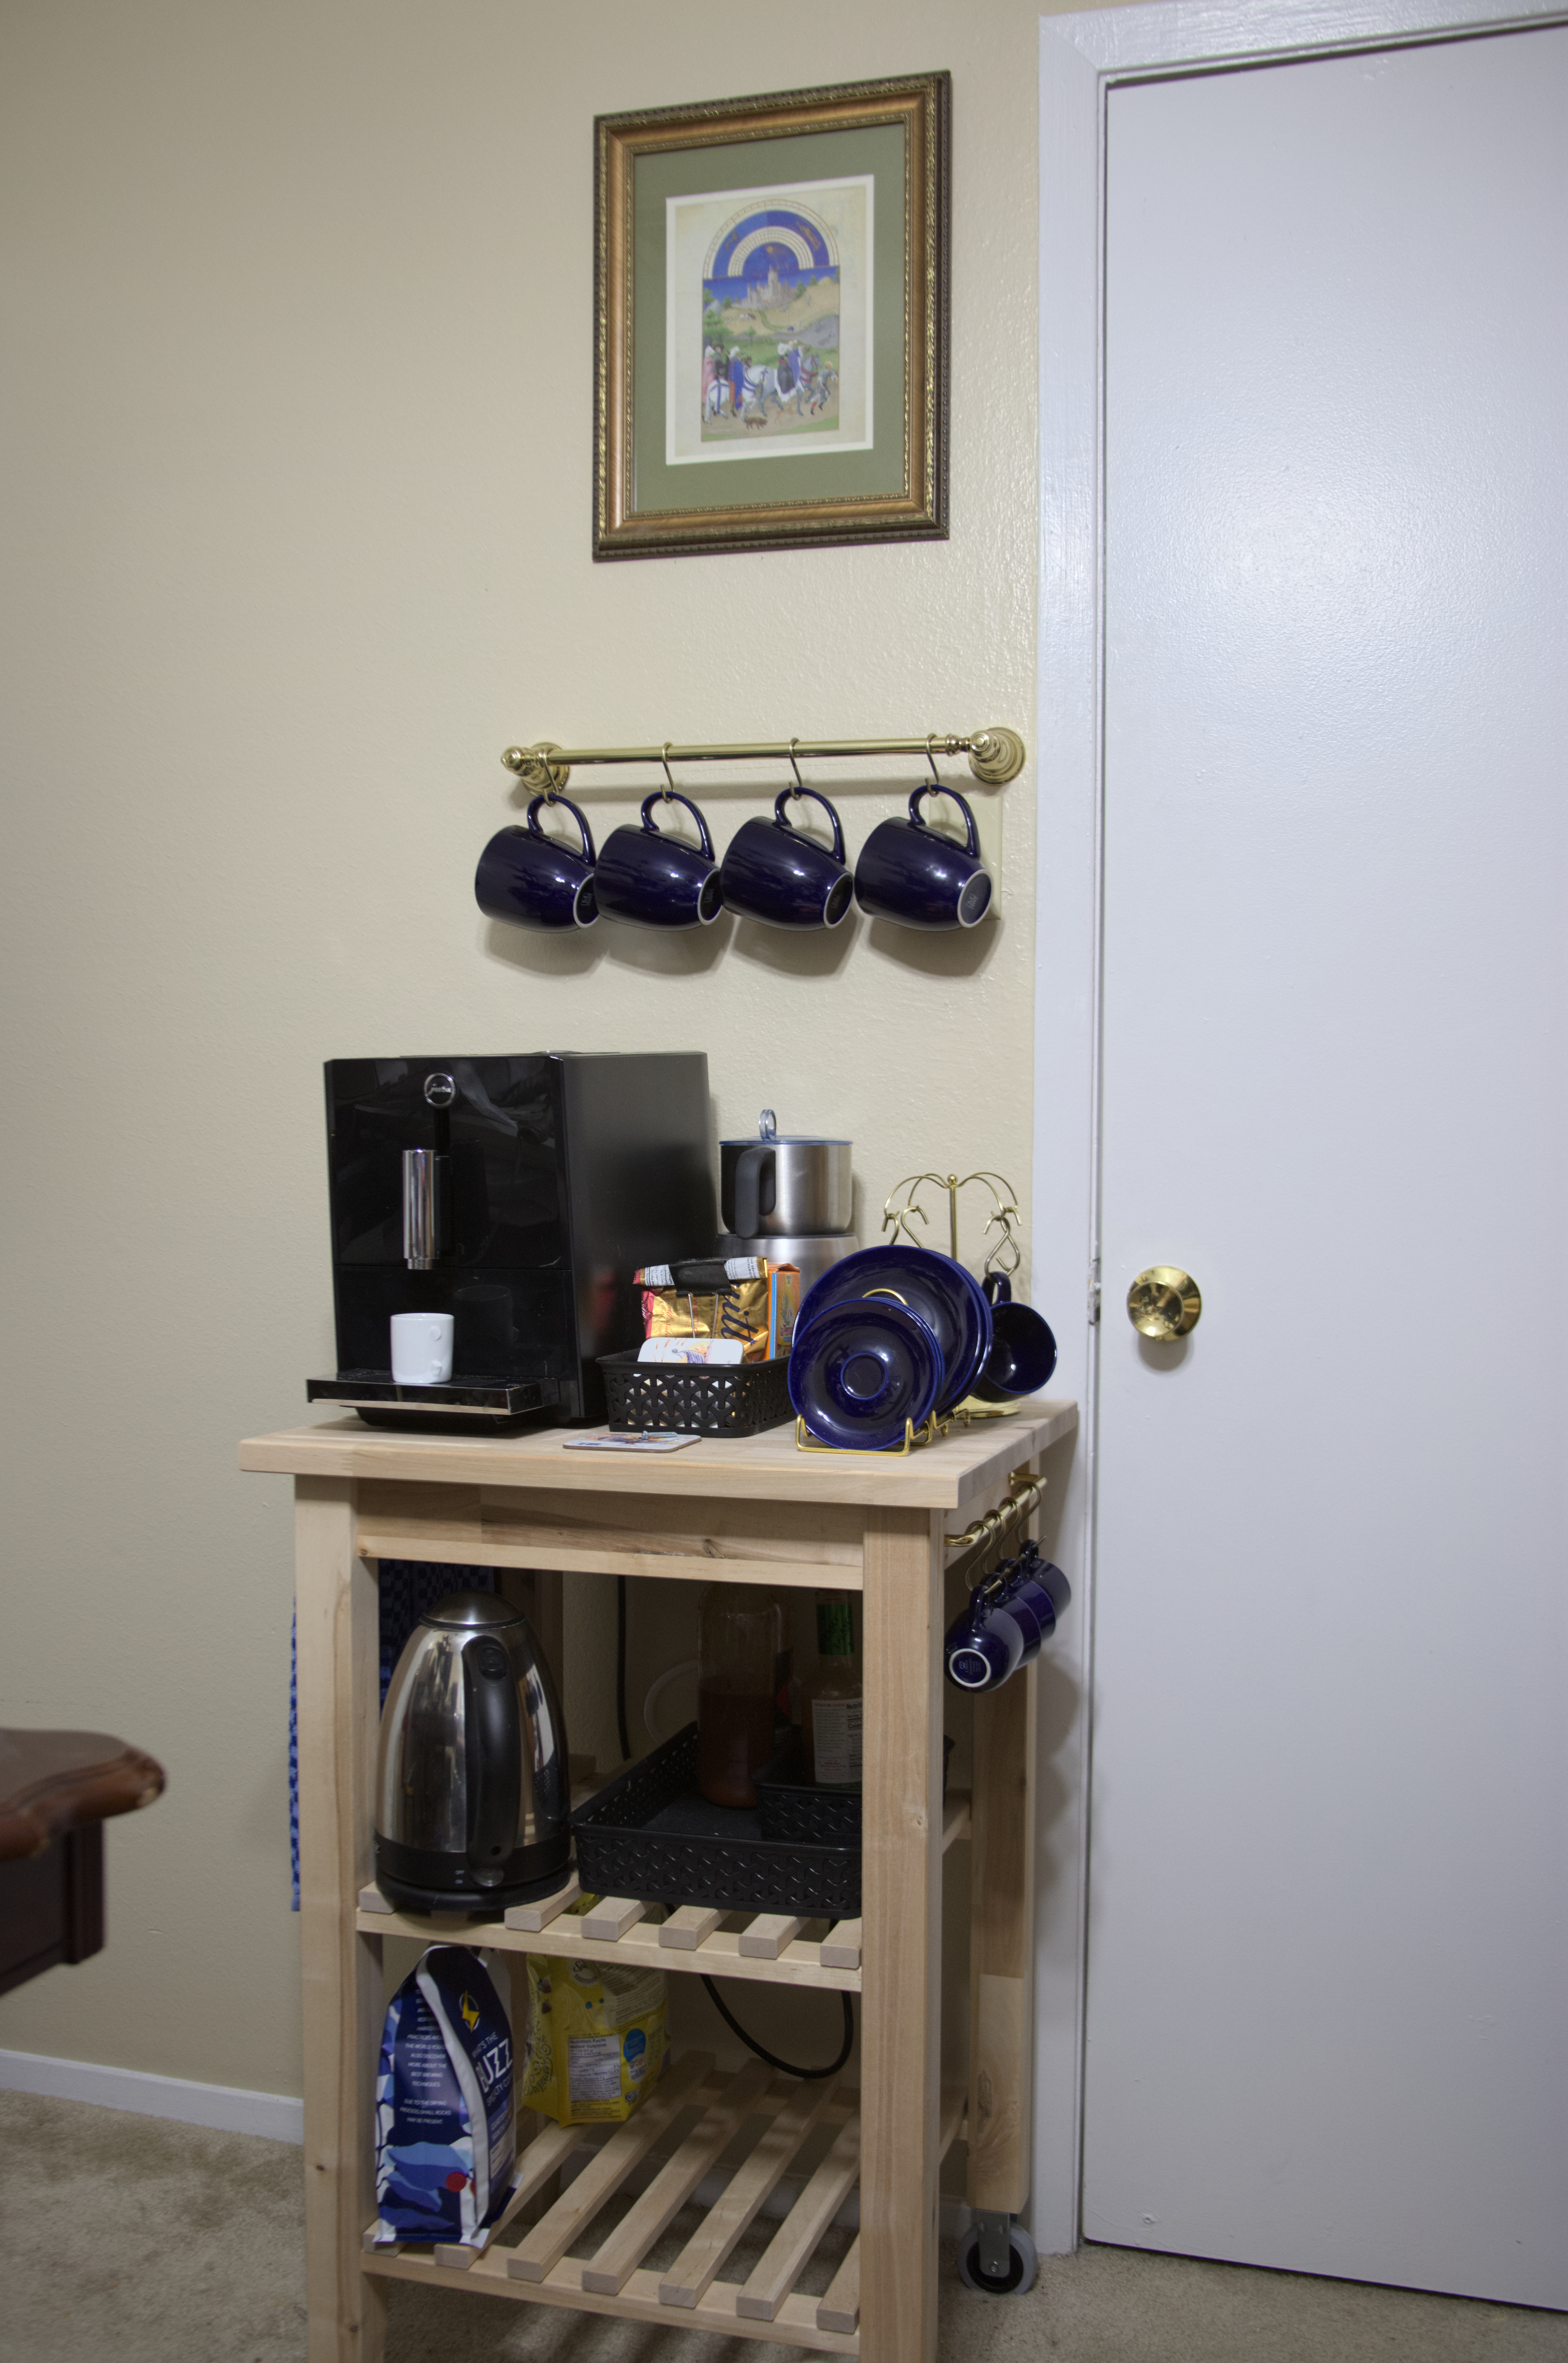 A picture of a coffeemaker, mugs, and a kettle on a kitchen island